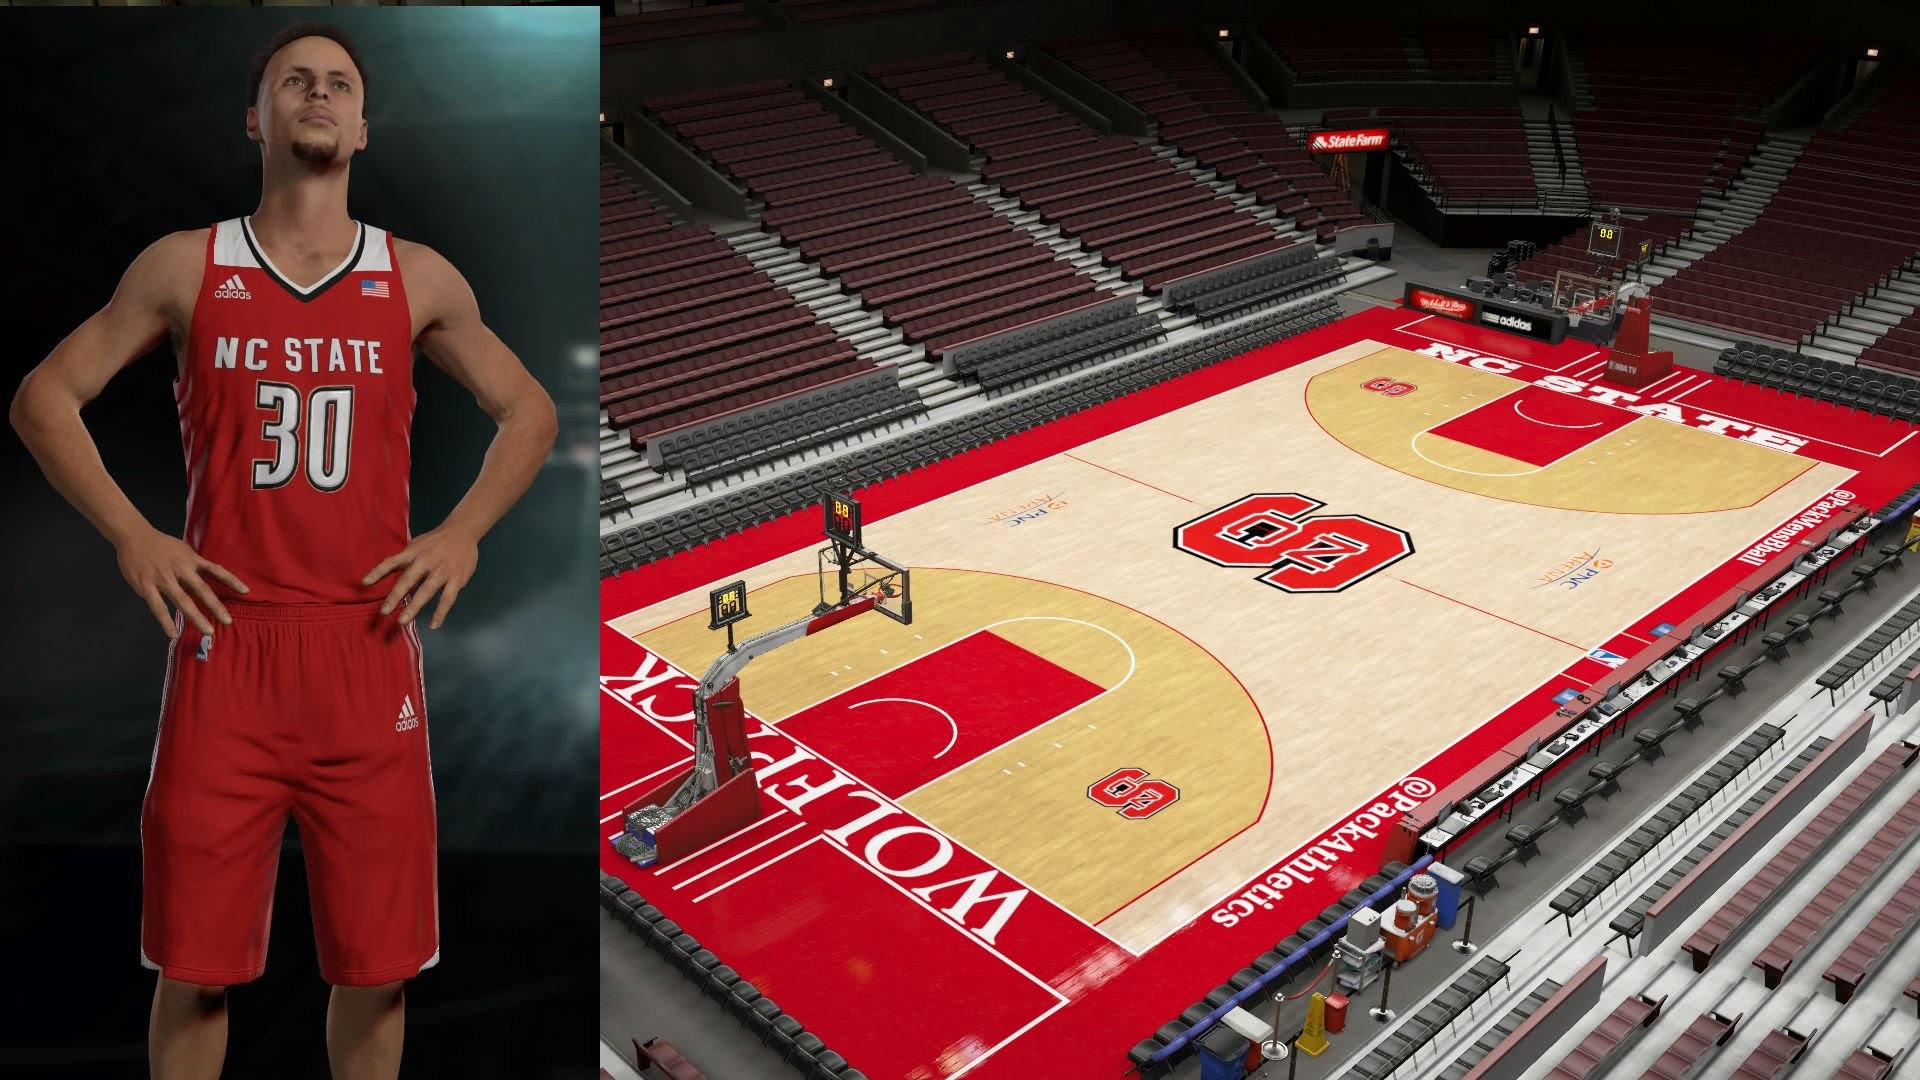 1920x1080 NC State Wolfpack Jerseys & Arena Tutorial (NBA 2K16)